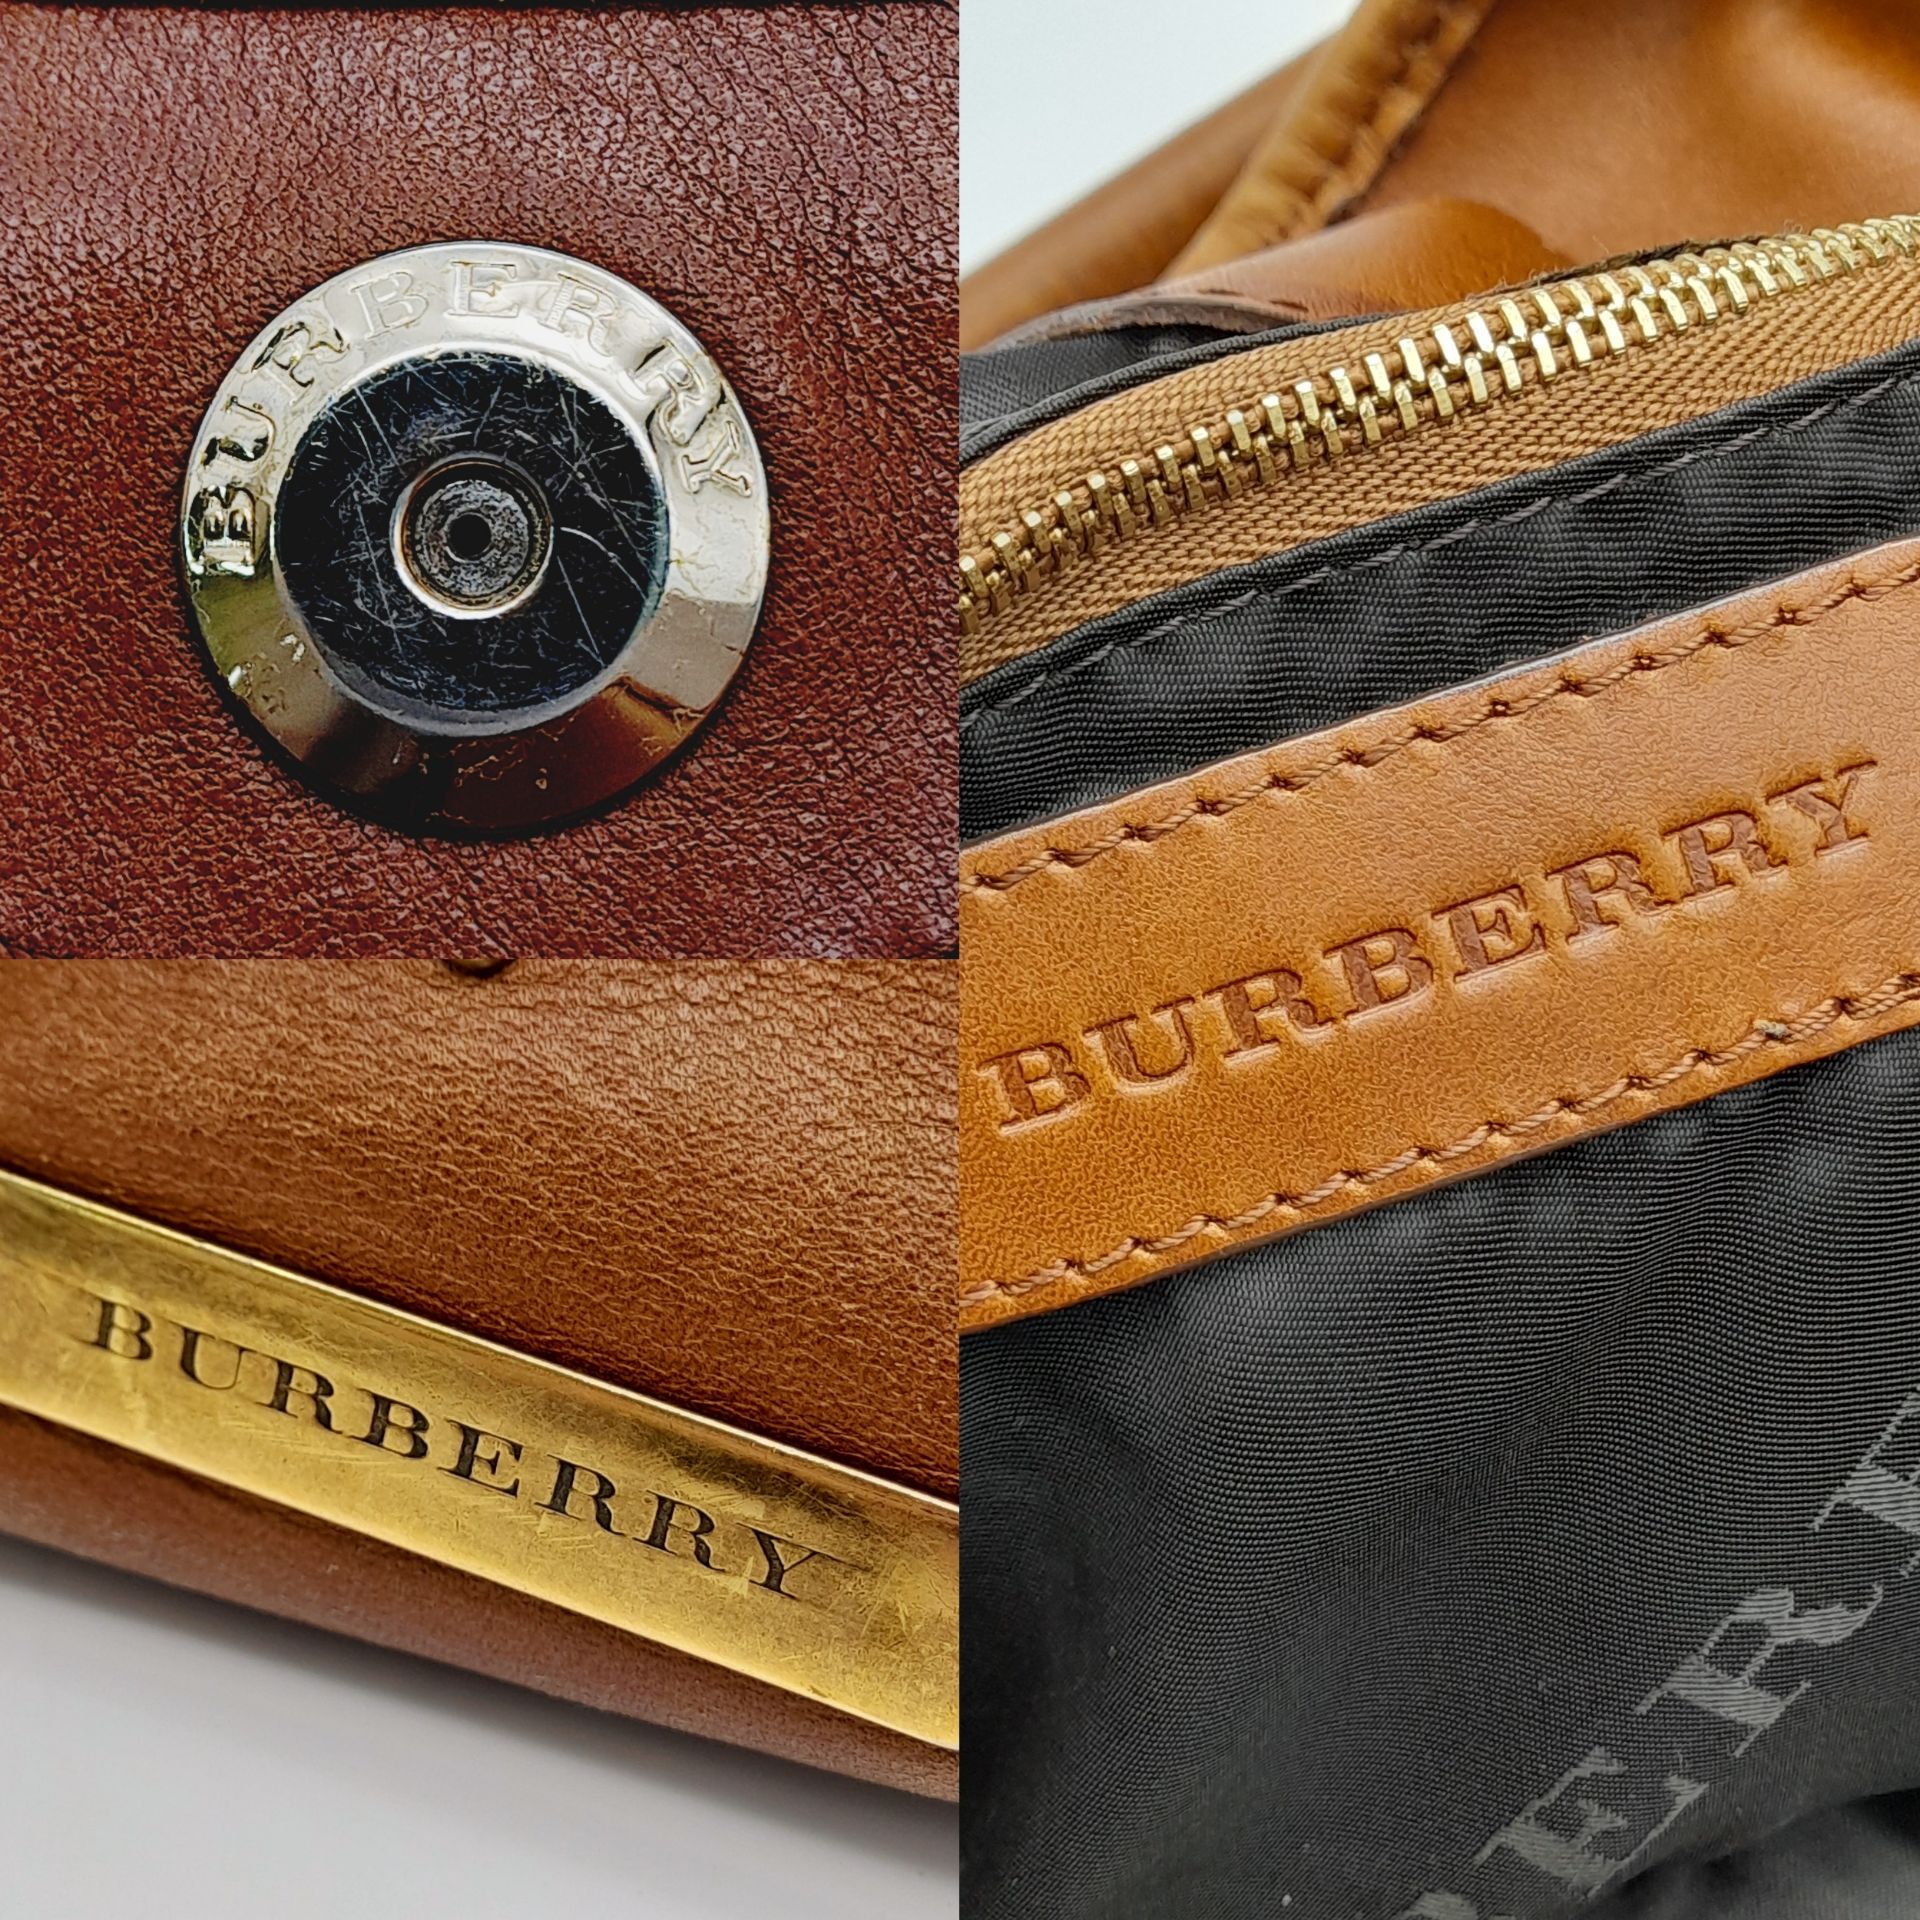 A Burberry Tan Studded Heart Hobo Bag. Leather exterior with stud embellishments, golden-toned - Image 7 of 8